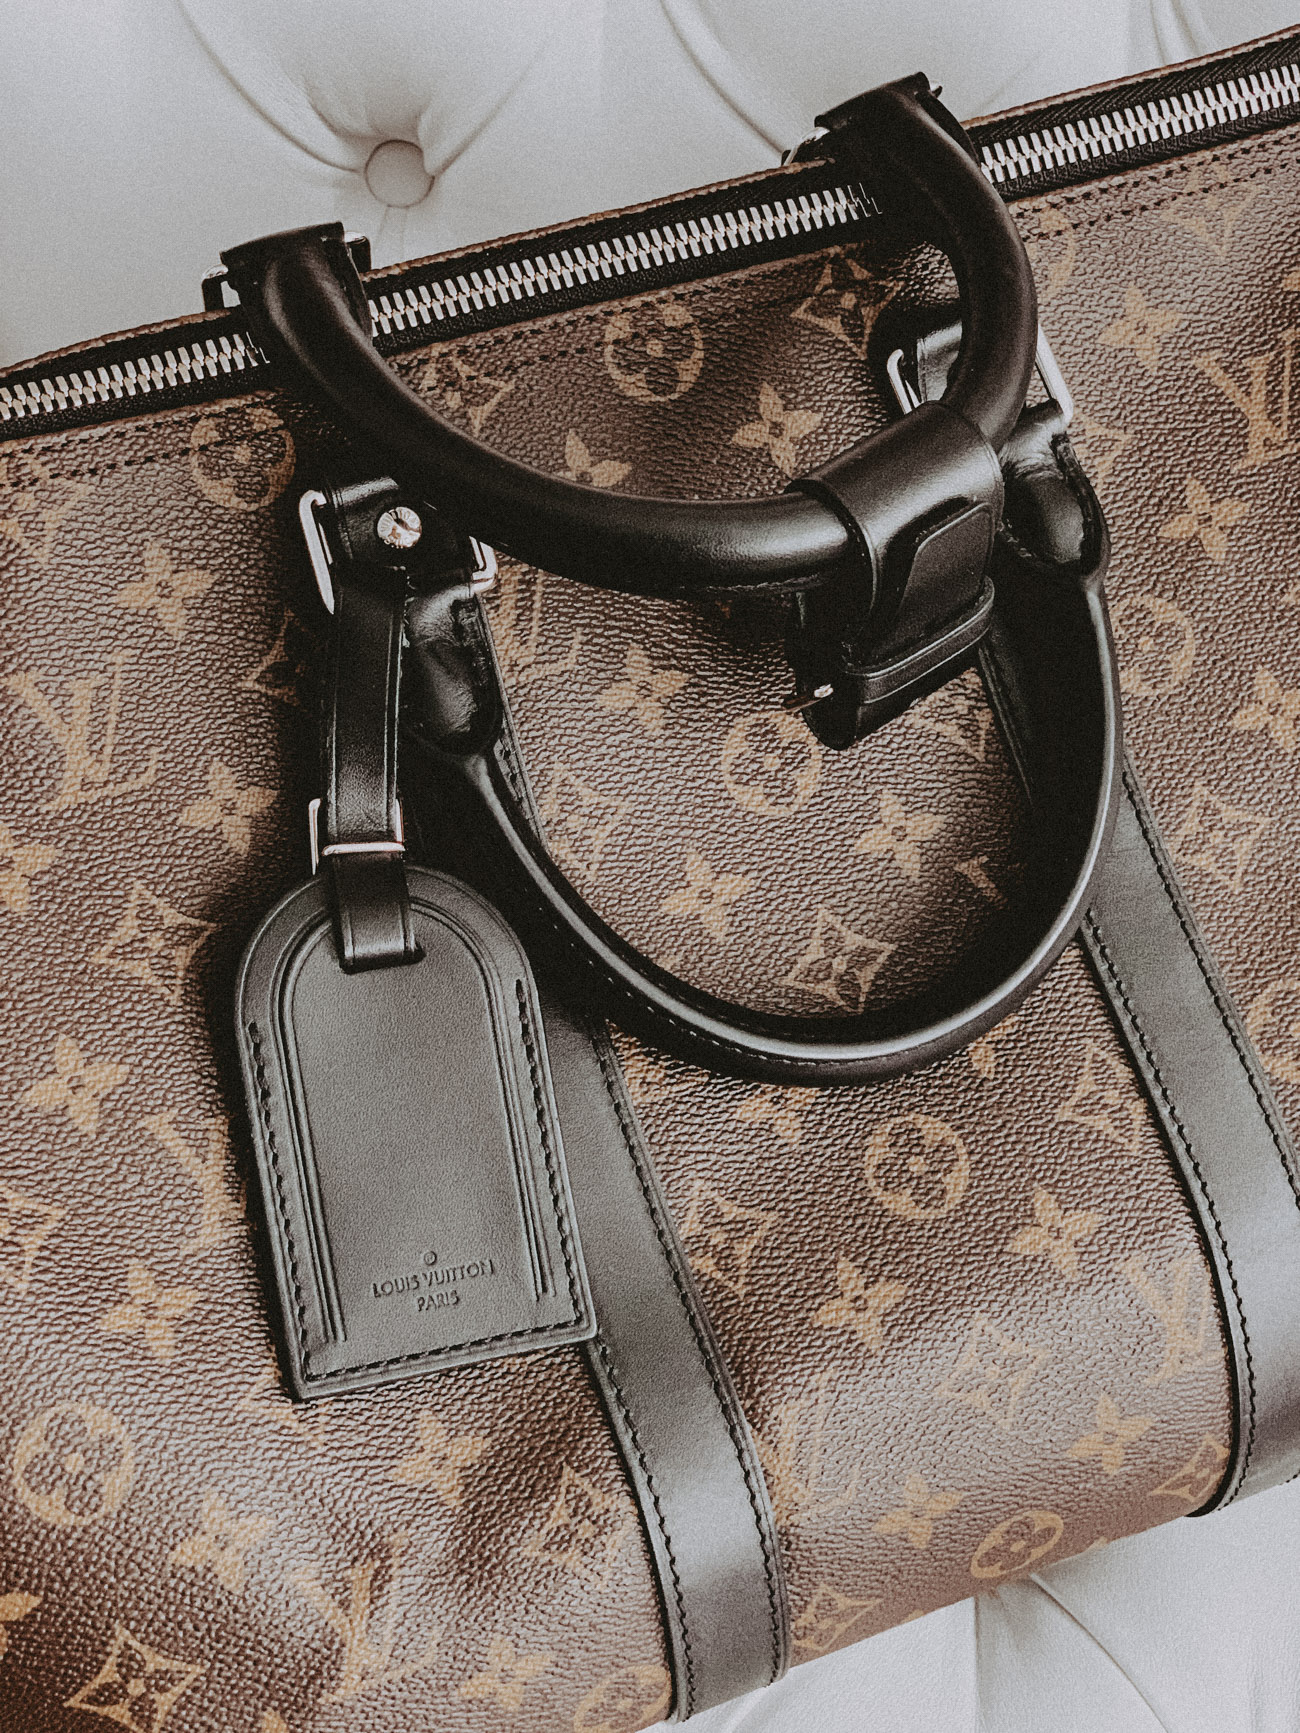 BAG REVIEW: Louis Vuitton Keepall Bandoulière 45 - BLONDIE IN THE CITY